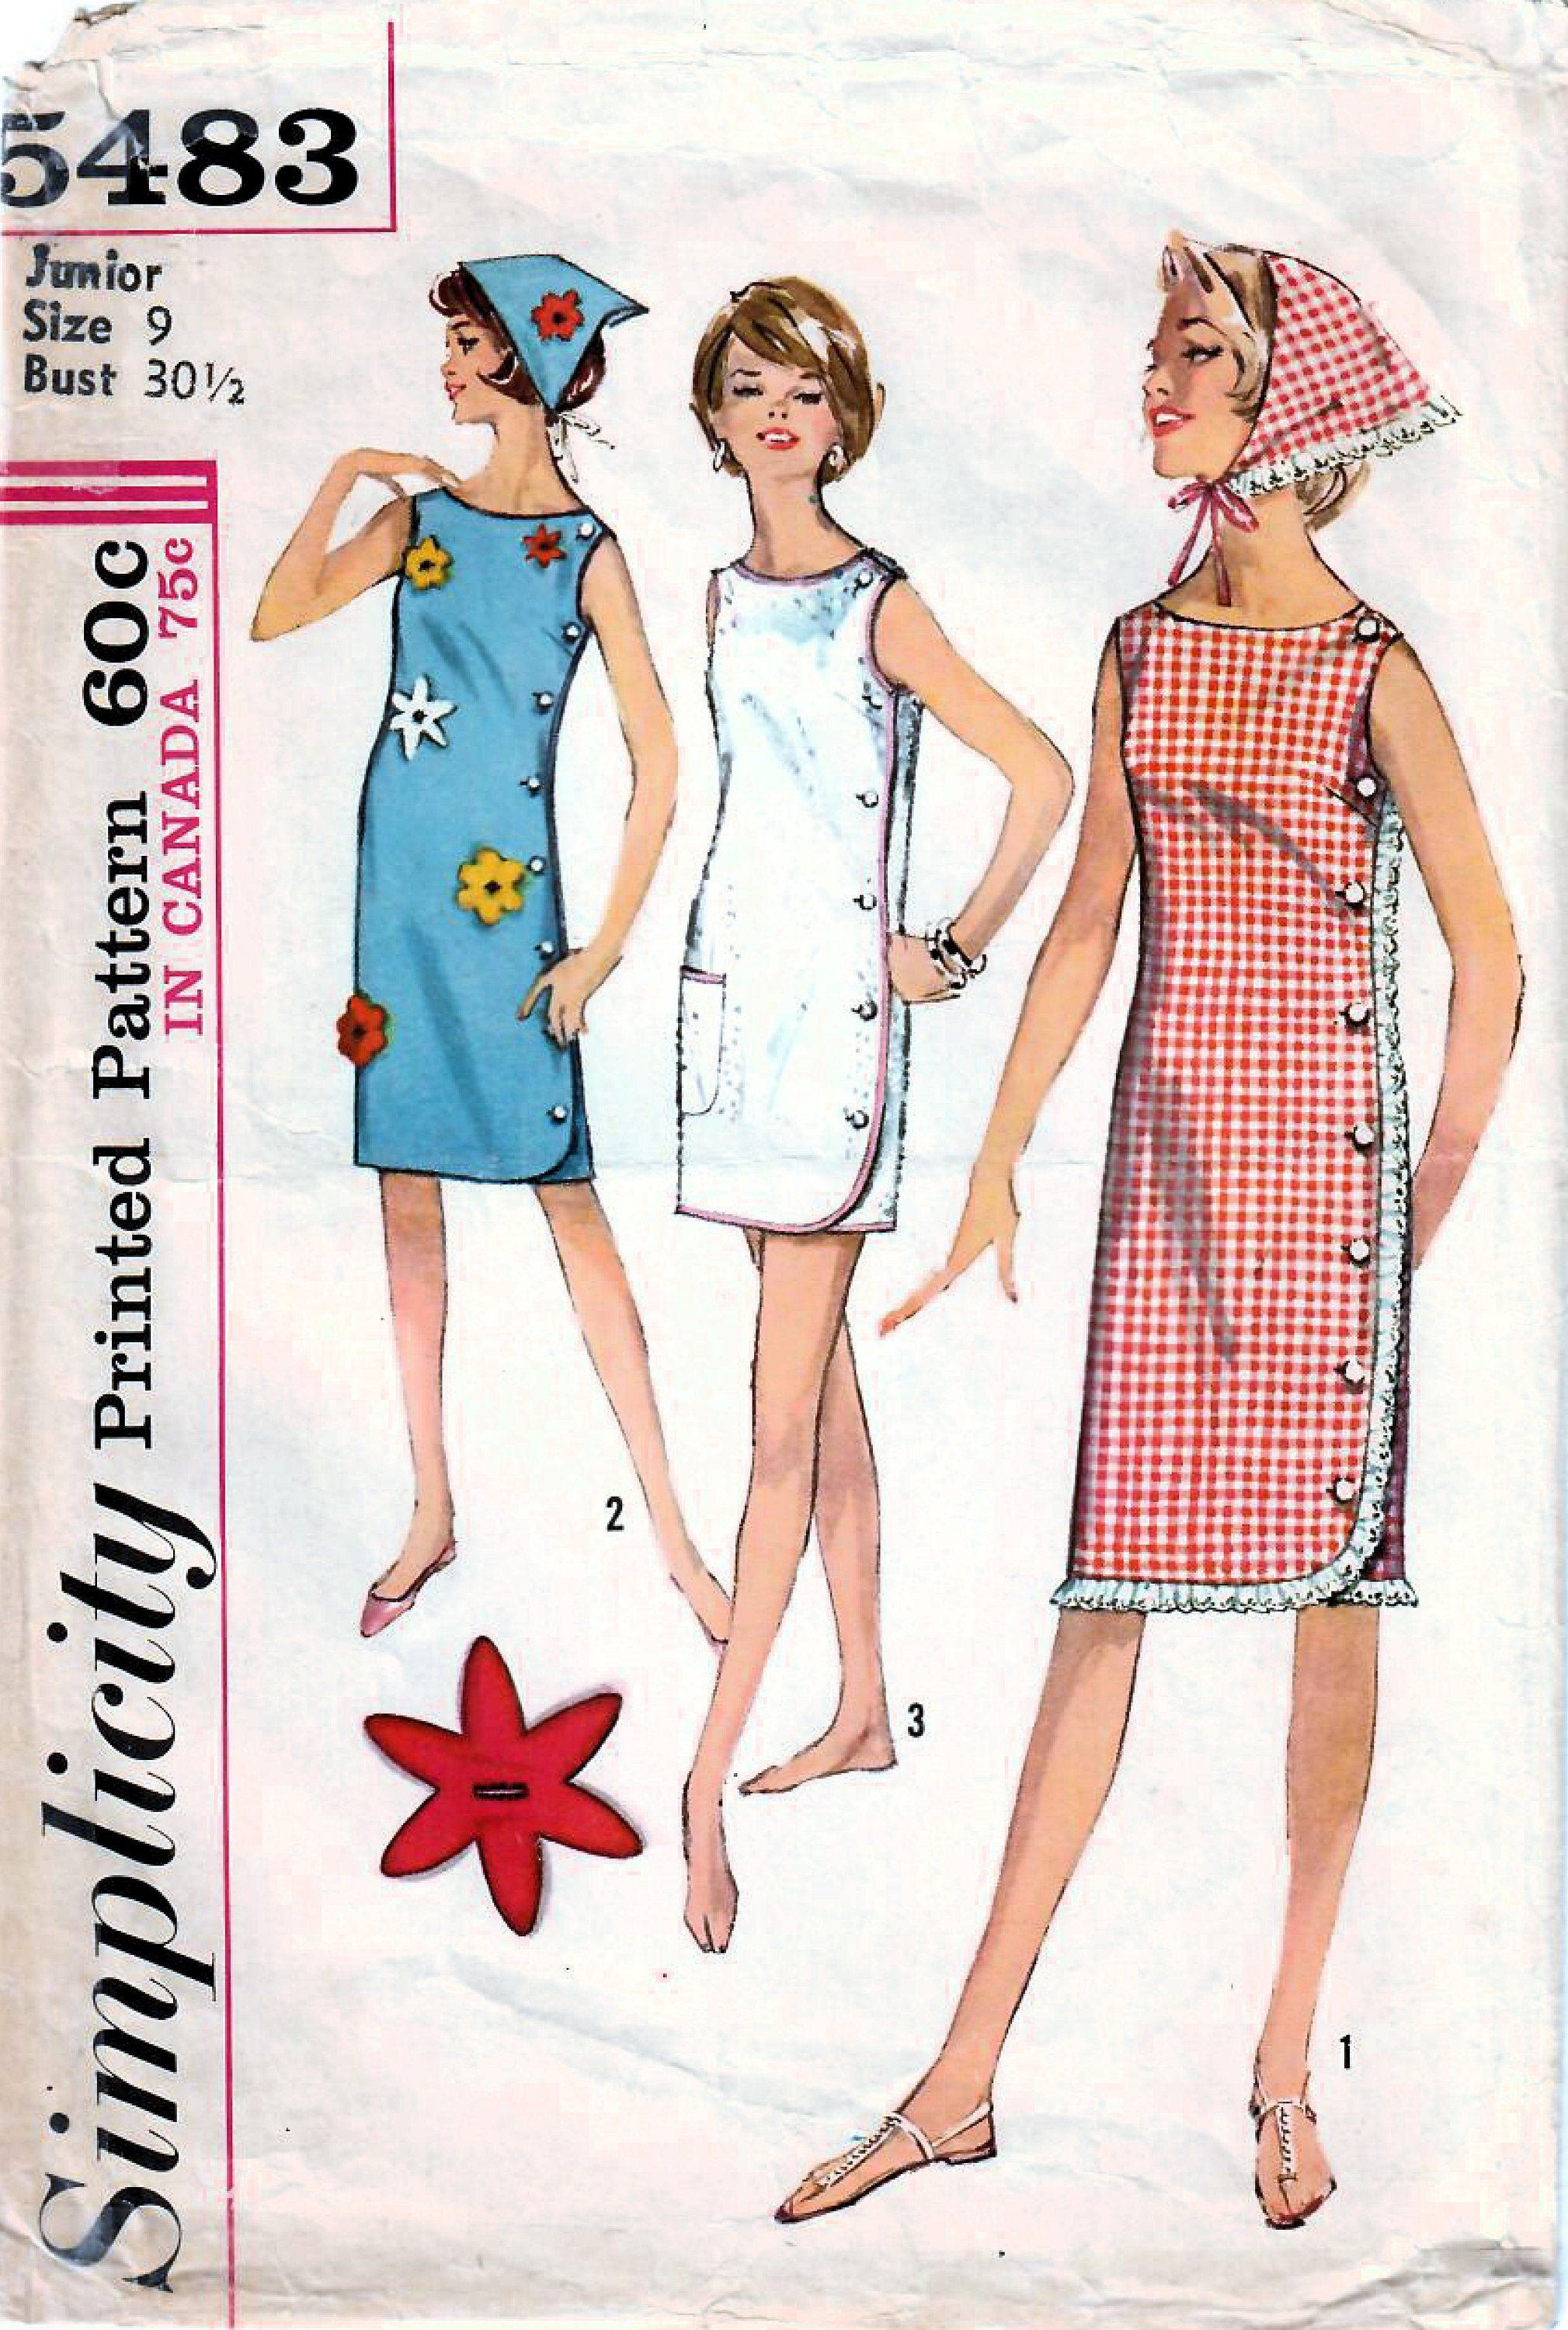 1960s Simplicity 5483 Vintage Sewing Pattern Junior One-Piece | Etsy - 1960s Simplicity 5483 Vintage Sewing Pattern Junior One-Piece | Etsy -   19 vintage diy Fashion ideas